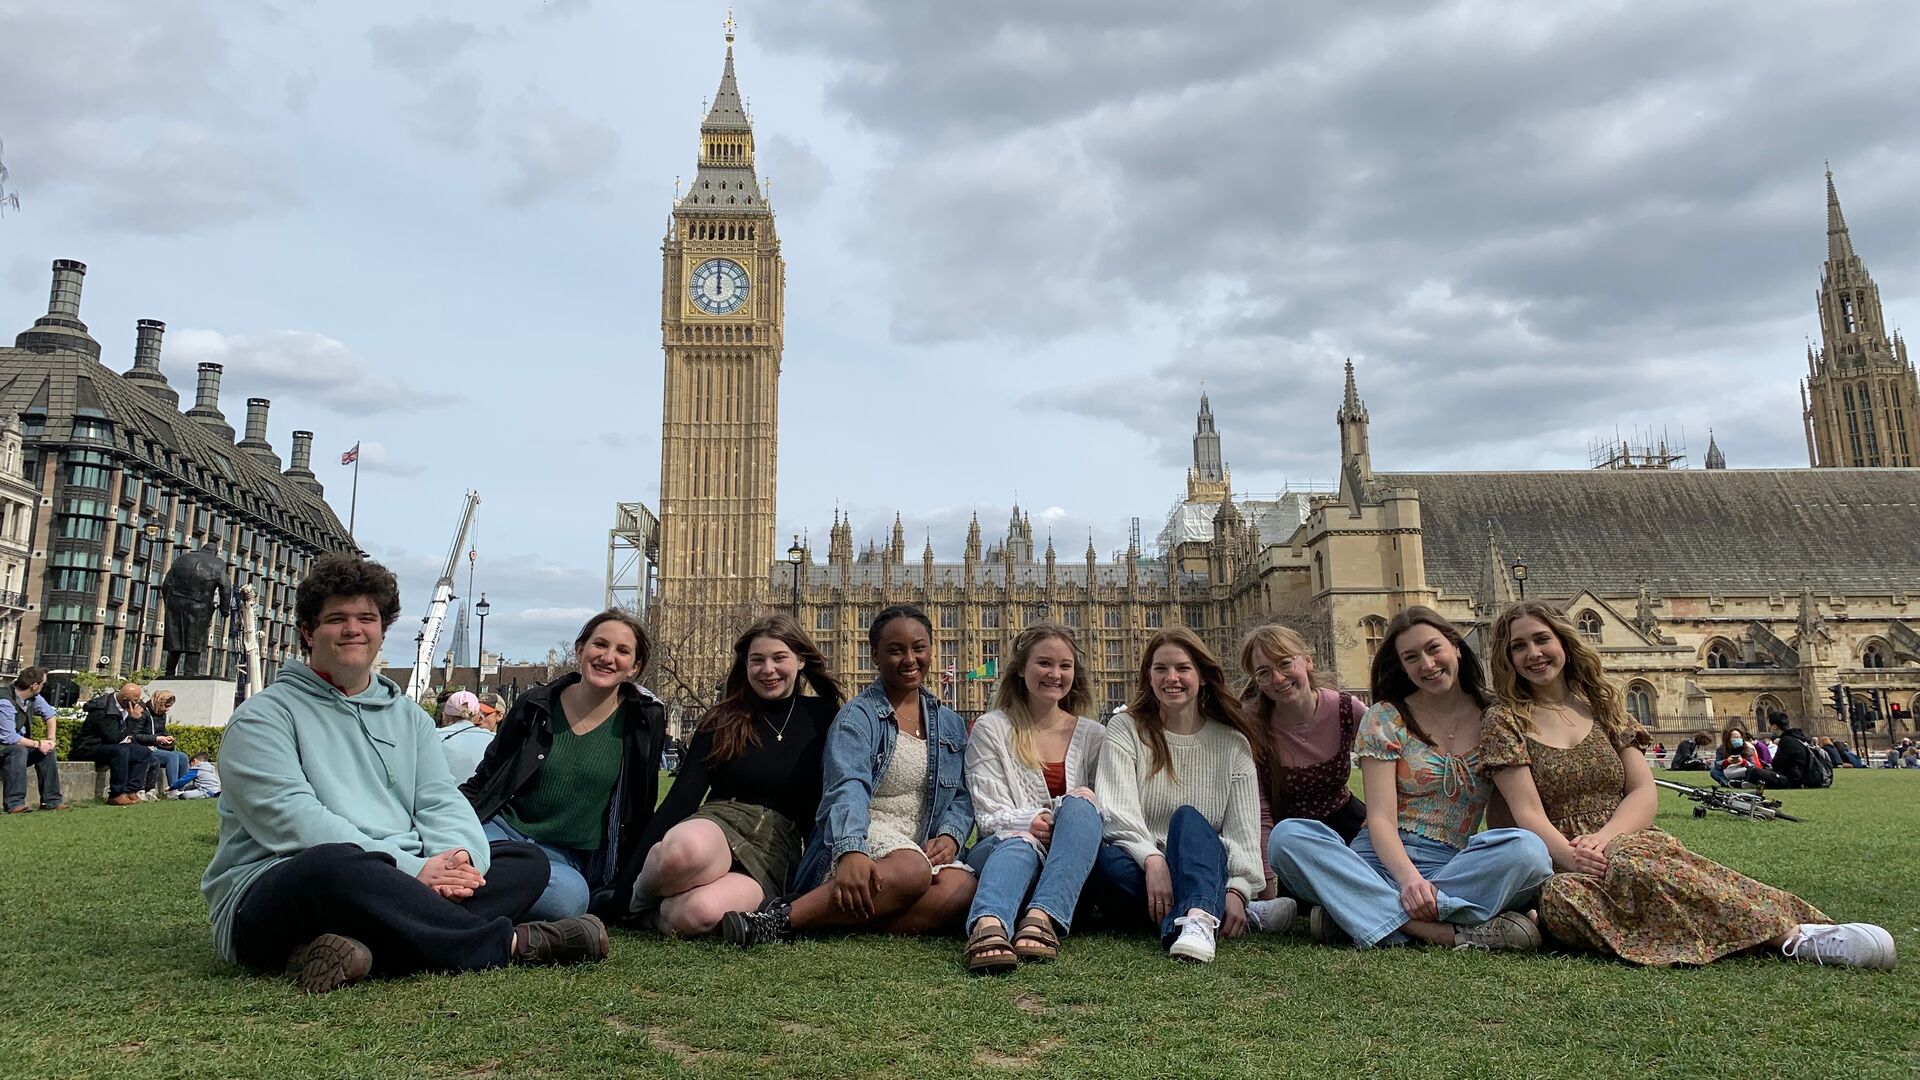 Students sitting on the lawn in front of Big Ben in London